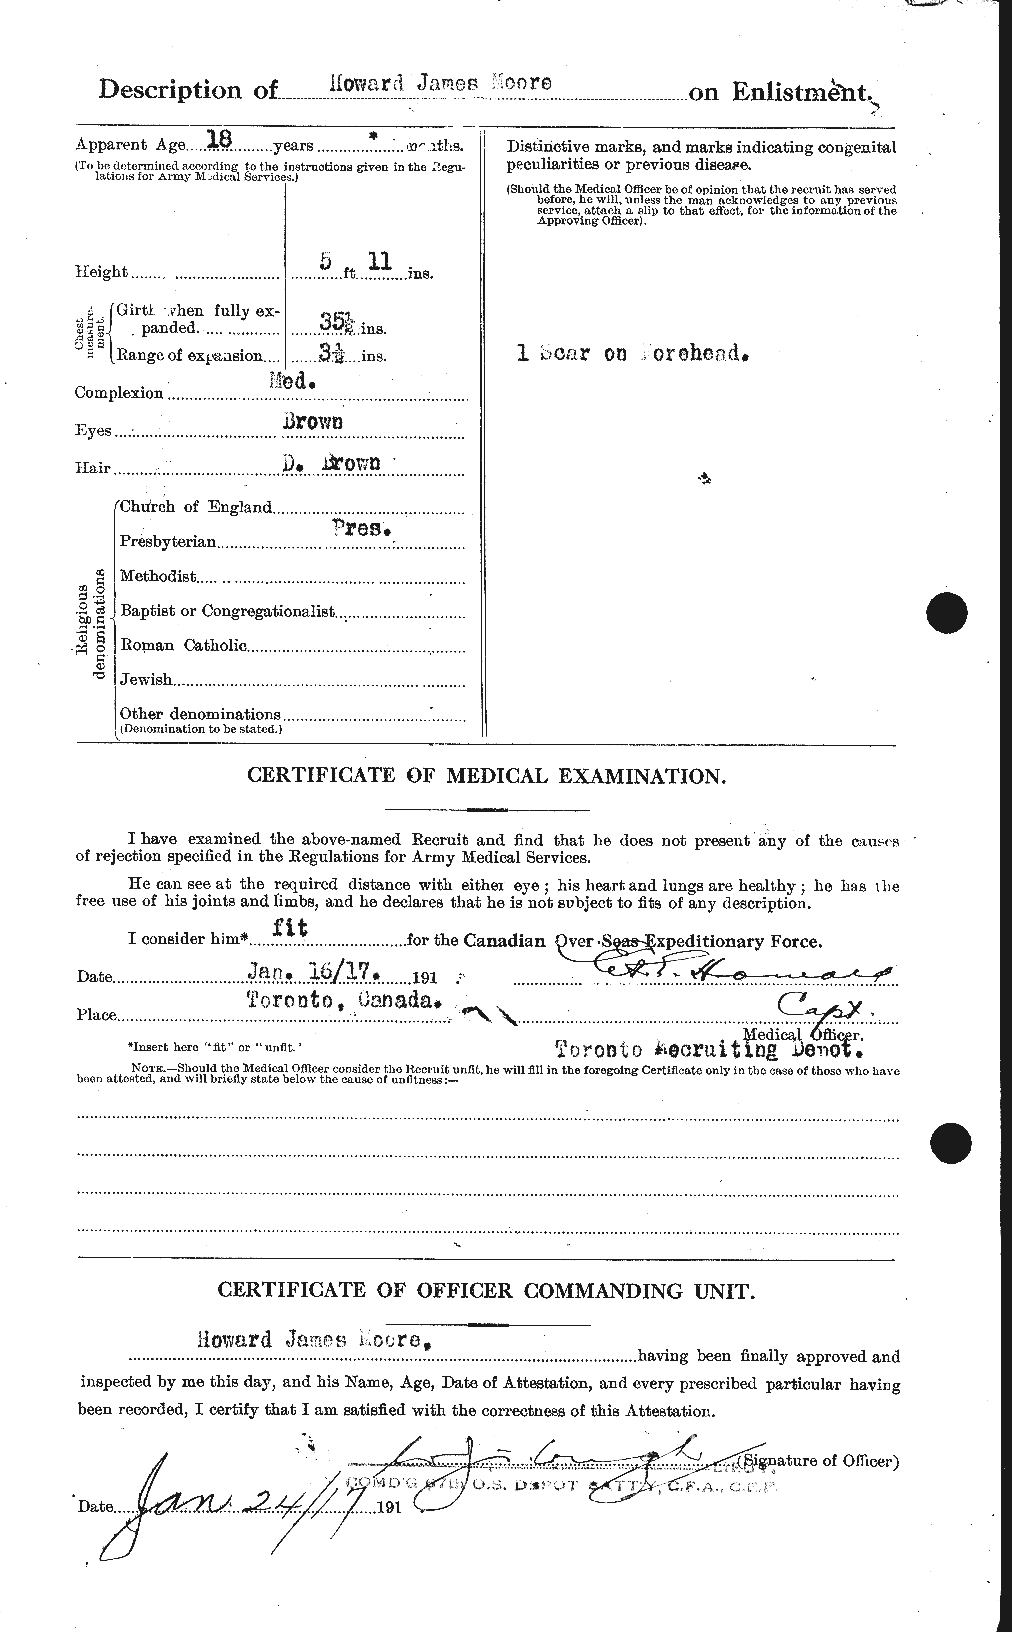 Personnel Records of the First World War - CEF 502137b